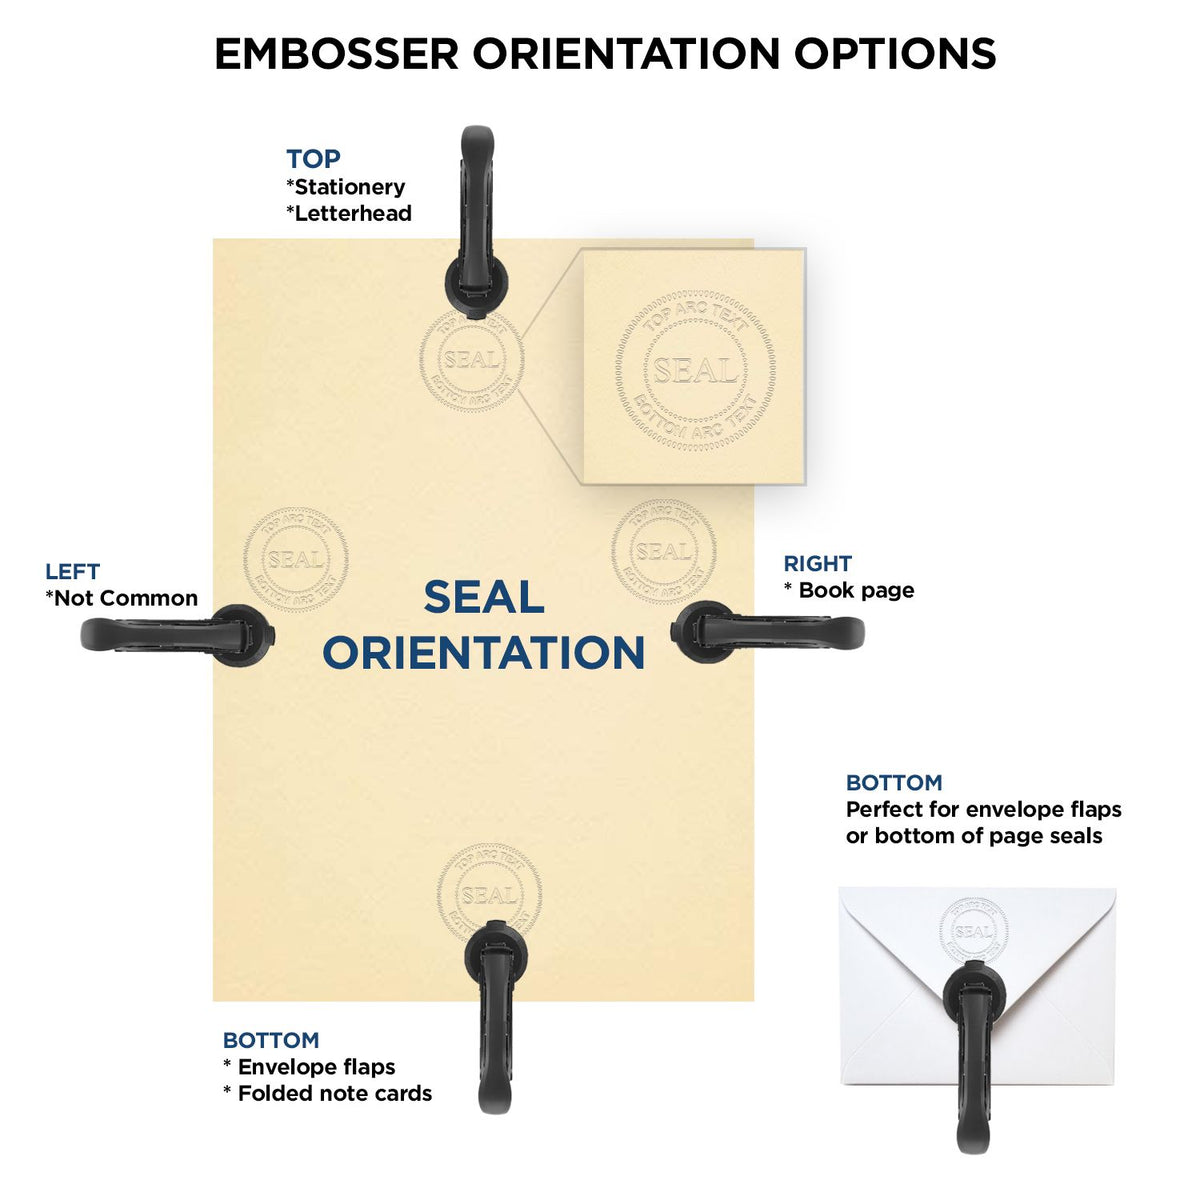 An infographic for the North Dakota Geologist Desk Seal showing embosser orientation, this is showing examples of a top, bottom, right and left insert.